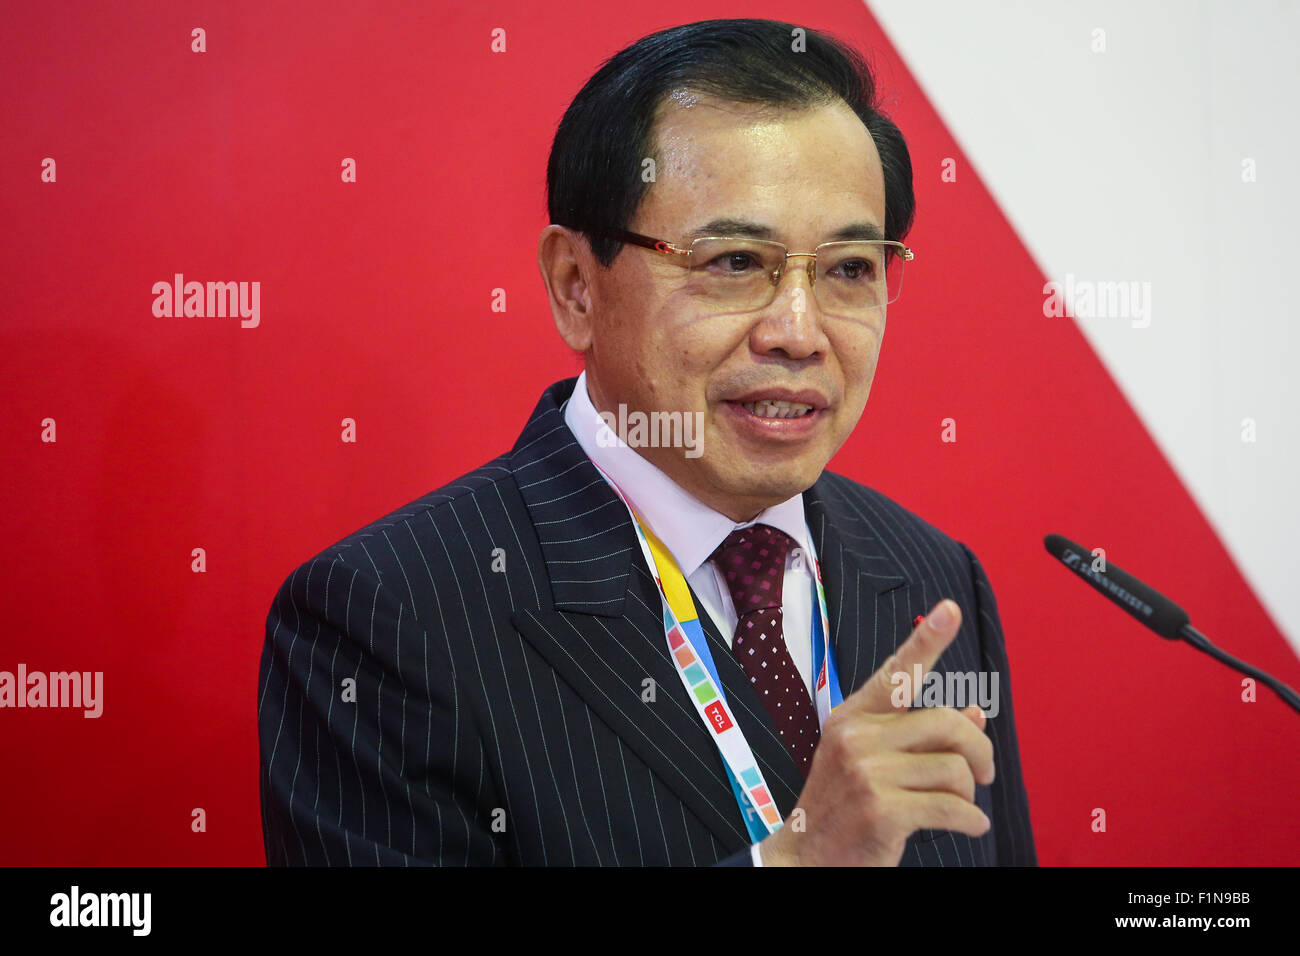 Berlin, Germany. 4th Sep, 2015. Li Dongsheng, Chairman of TCL Cooperation, speaks during the opening ceremony of 'China Brand Show' at the 55th IFA consumer electronics fair in Berlin, Germany, on Sept. 4, 2015. More than 150 exhibitors from China would present their latest products at this year's IFA consumer electronics fair, Europe's largest consumer electronics and home appliances fair, which kicked off on Friday in Berlin. Credit:  Zhang Fan/Xinhua/Alamy Live News Stock Photo